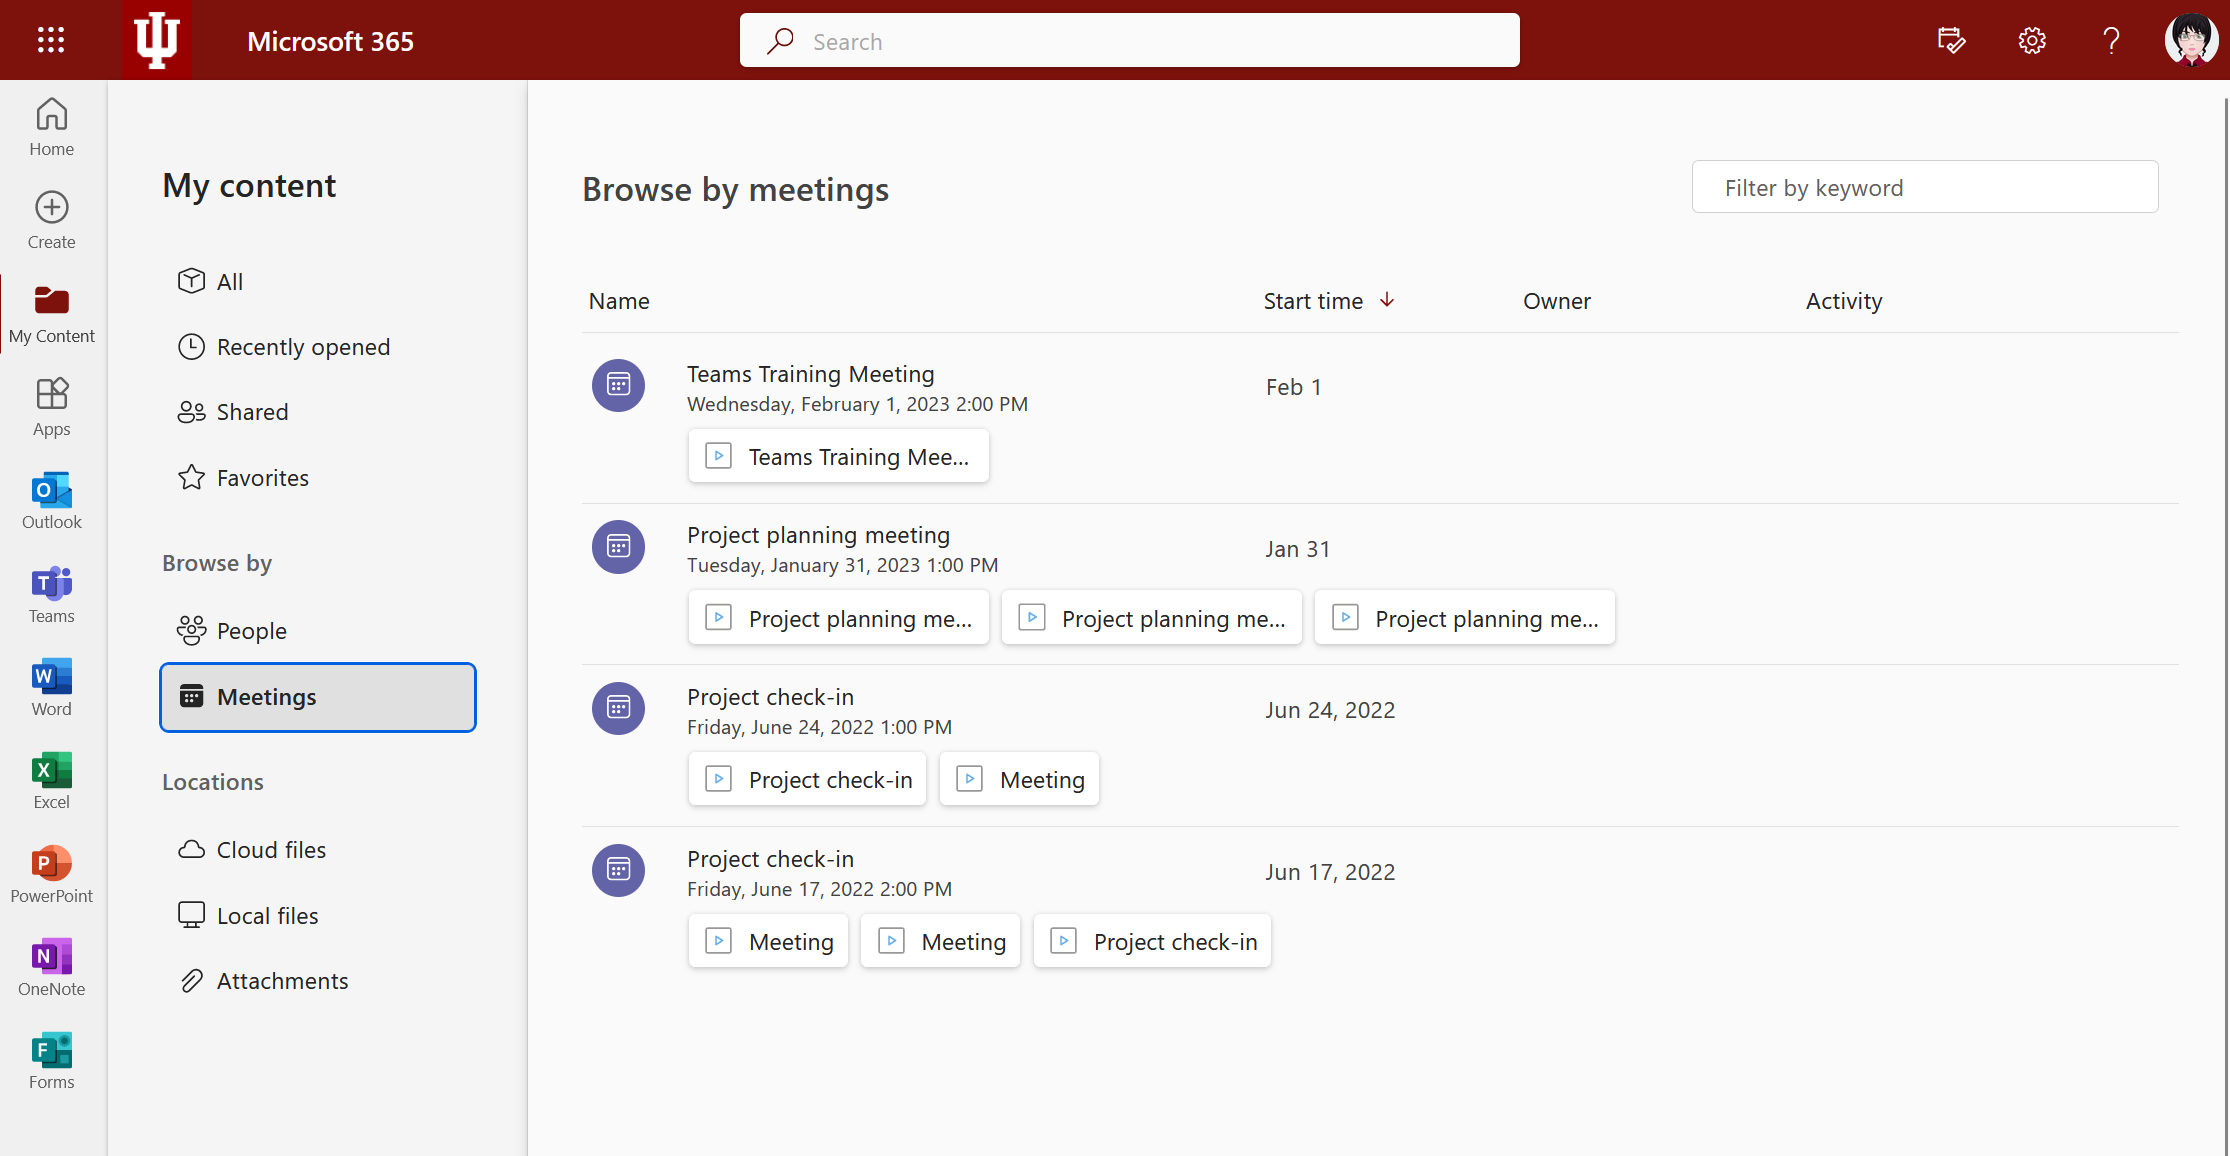 Microsoft 365 app, My Content showing the Meetings view selected.